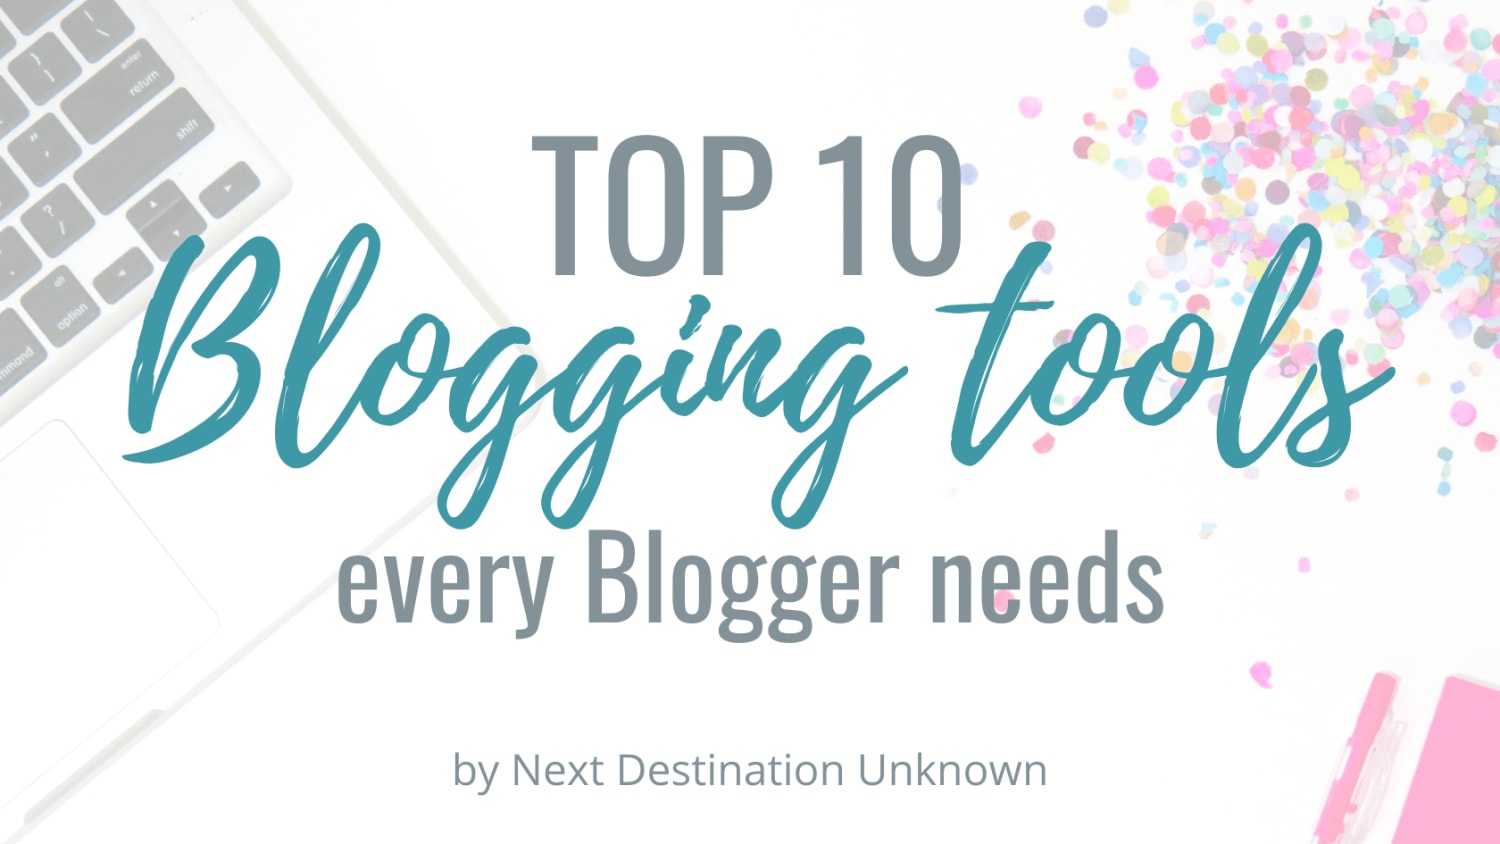 Top 10 Blogging Tools Every Blogger Needs